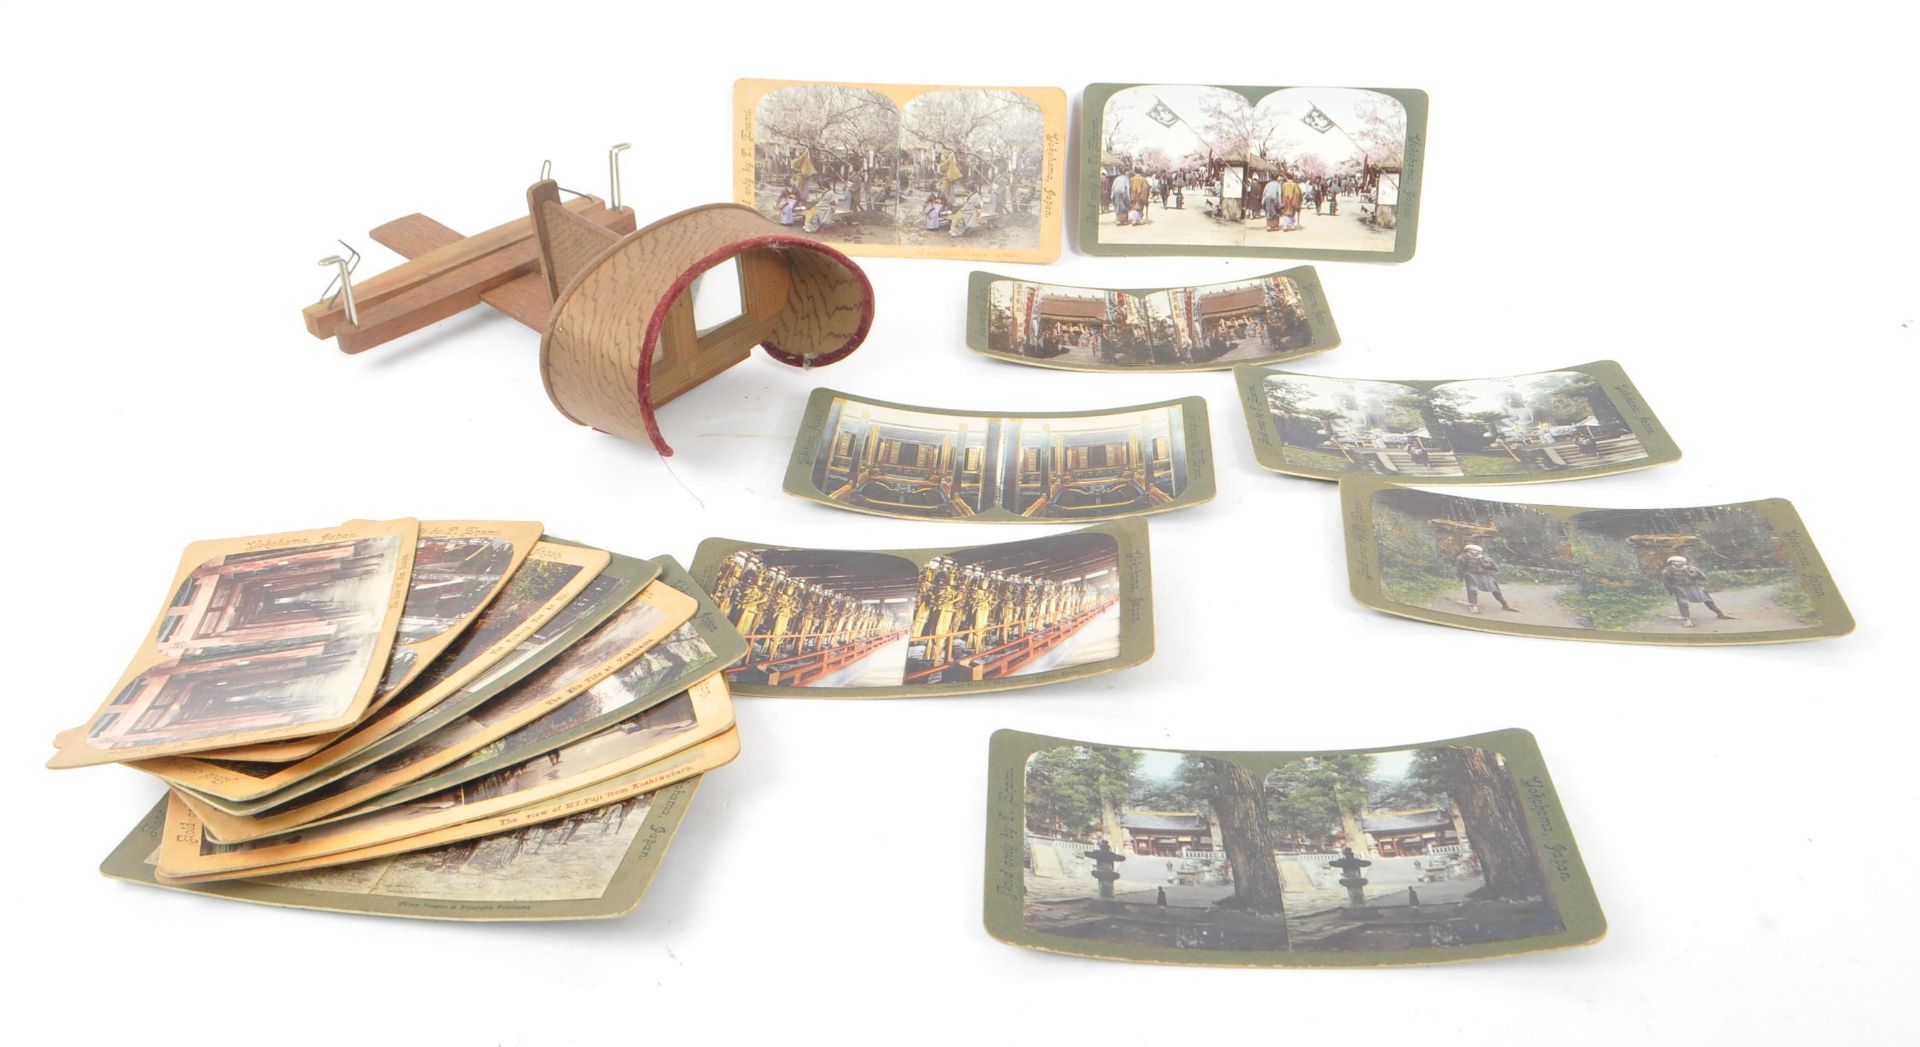 CIRCA. 1970S STEREOSCOPE VIEWER WITH SLIDES OF JAPAN